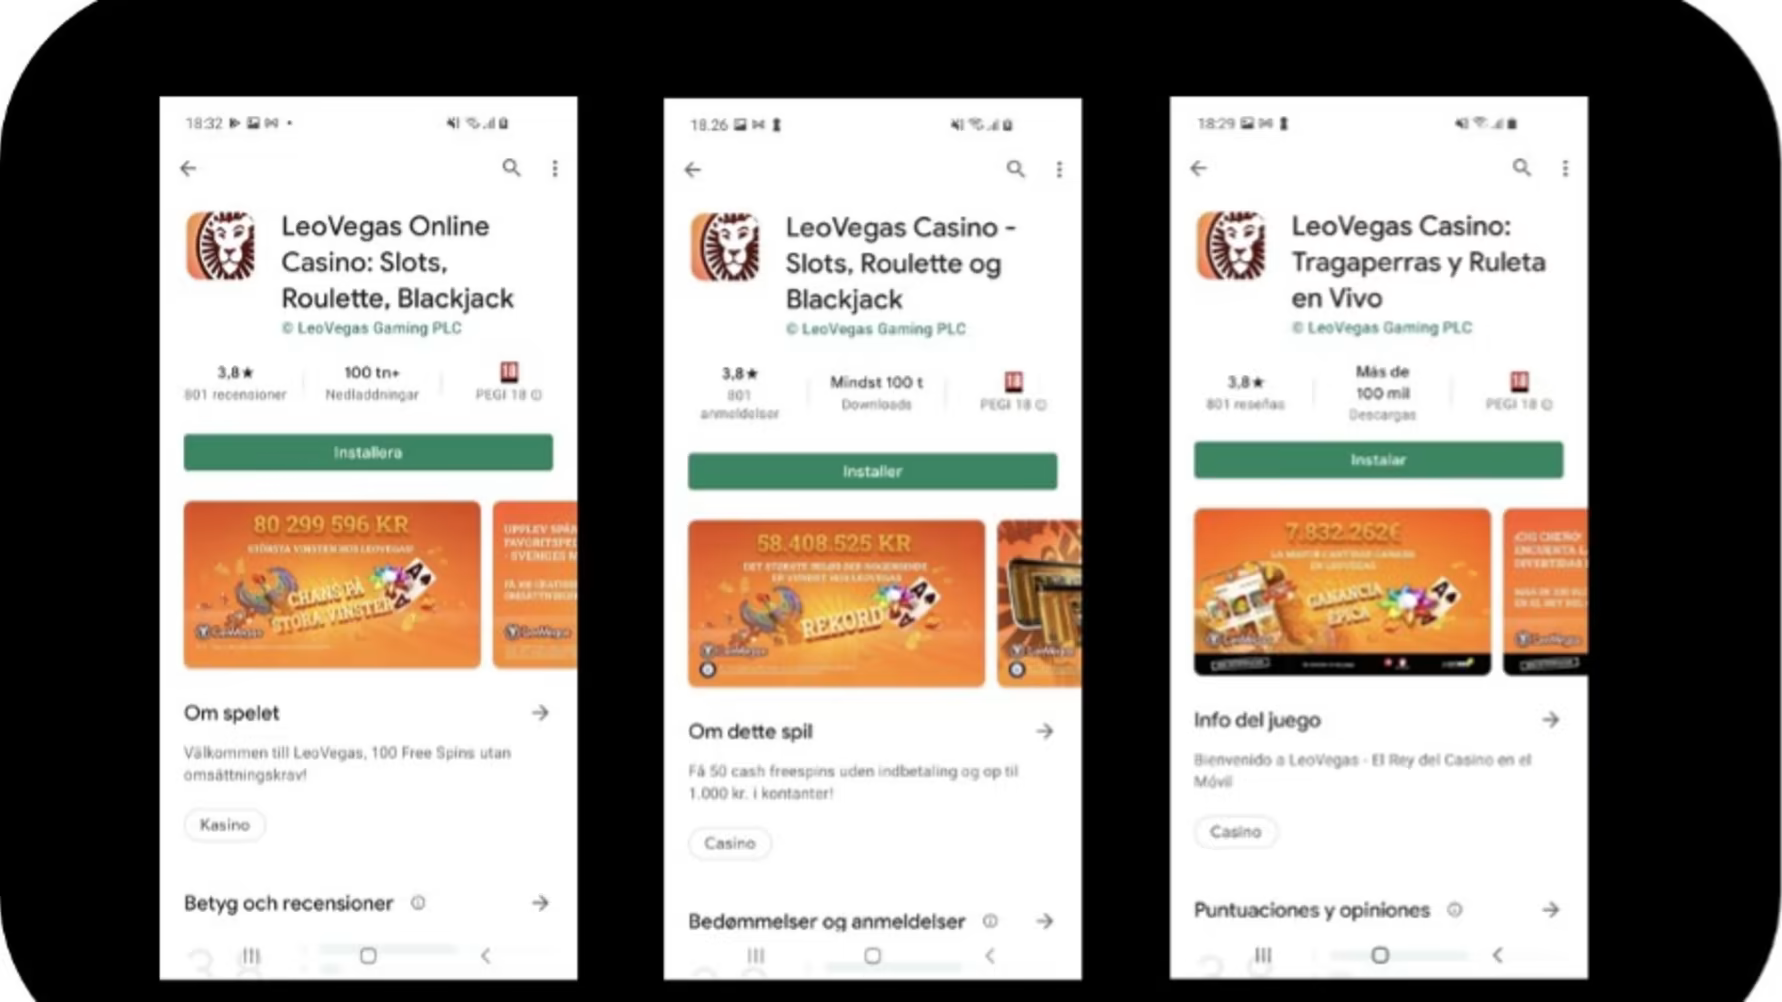 LeoVegas first gaming operator in Google Play Store